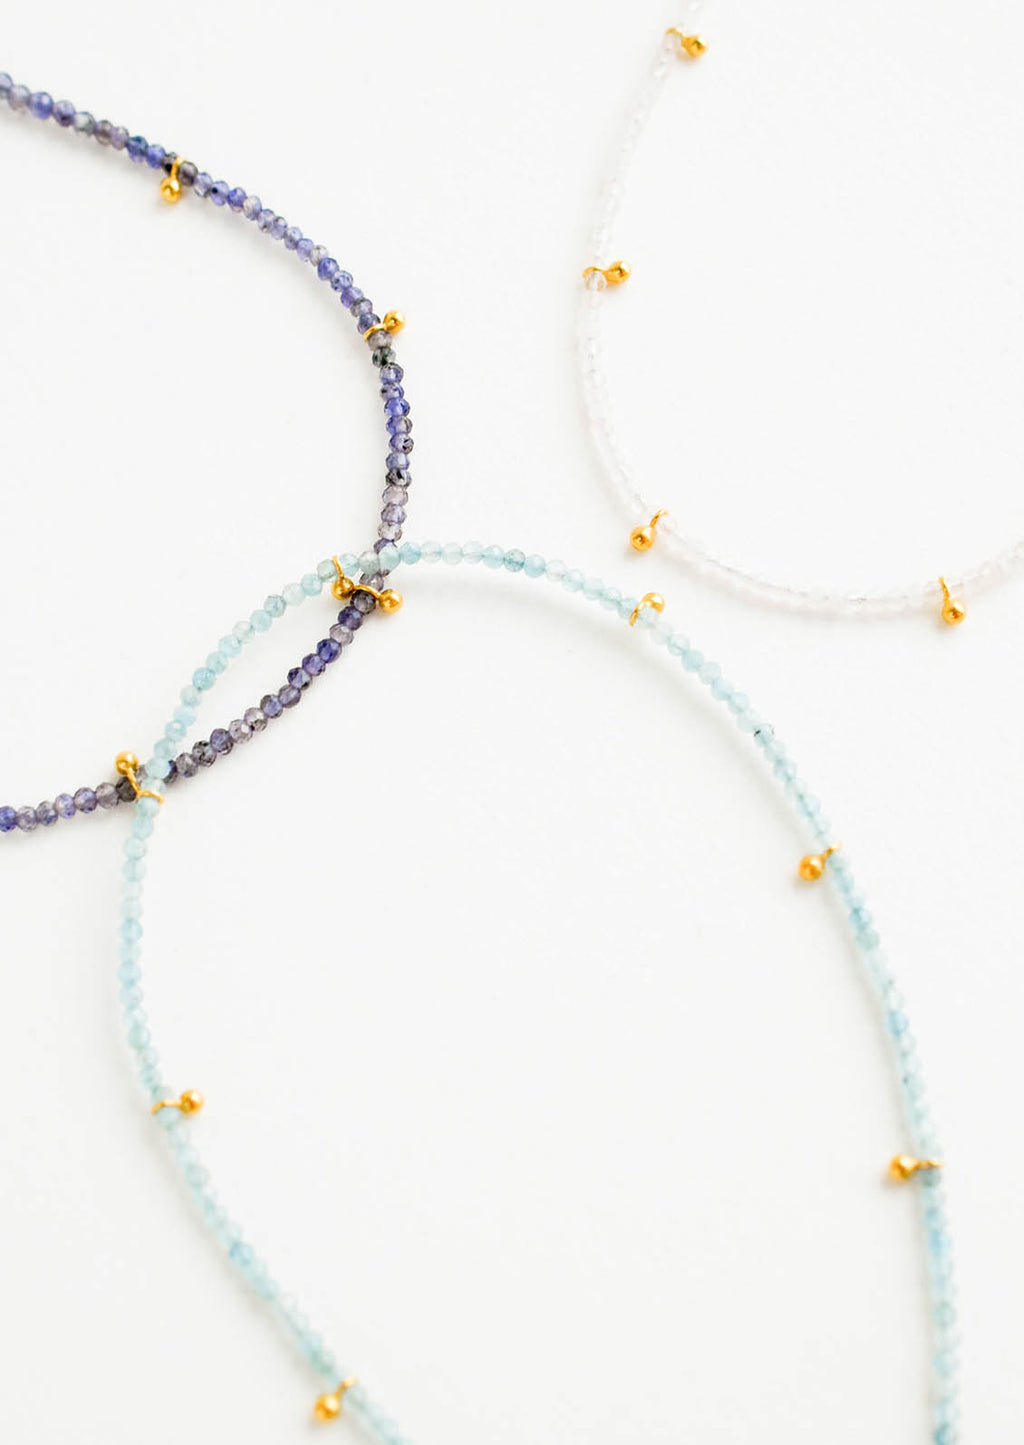 1: Three necklaces of gemstones and gold beads.